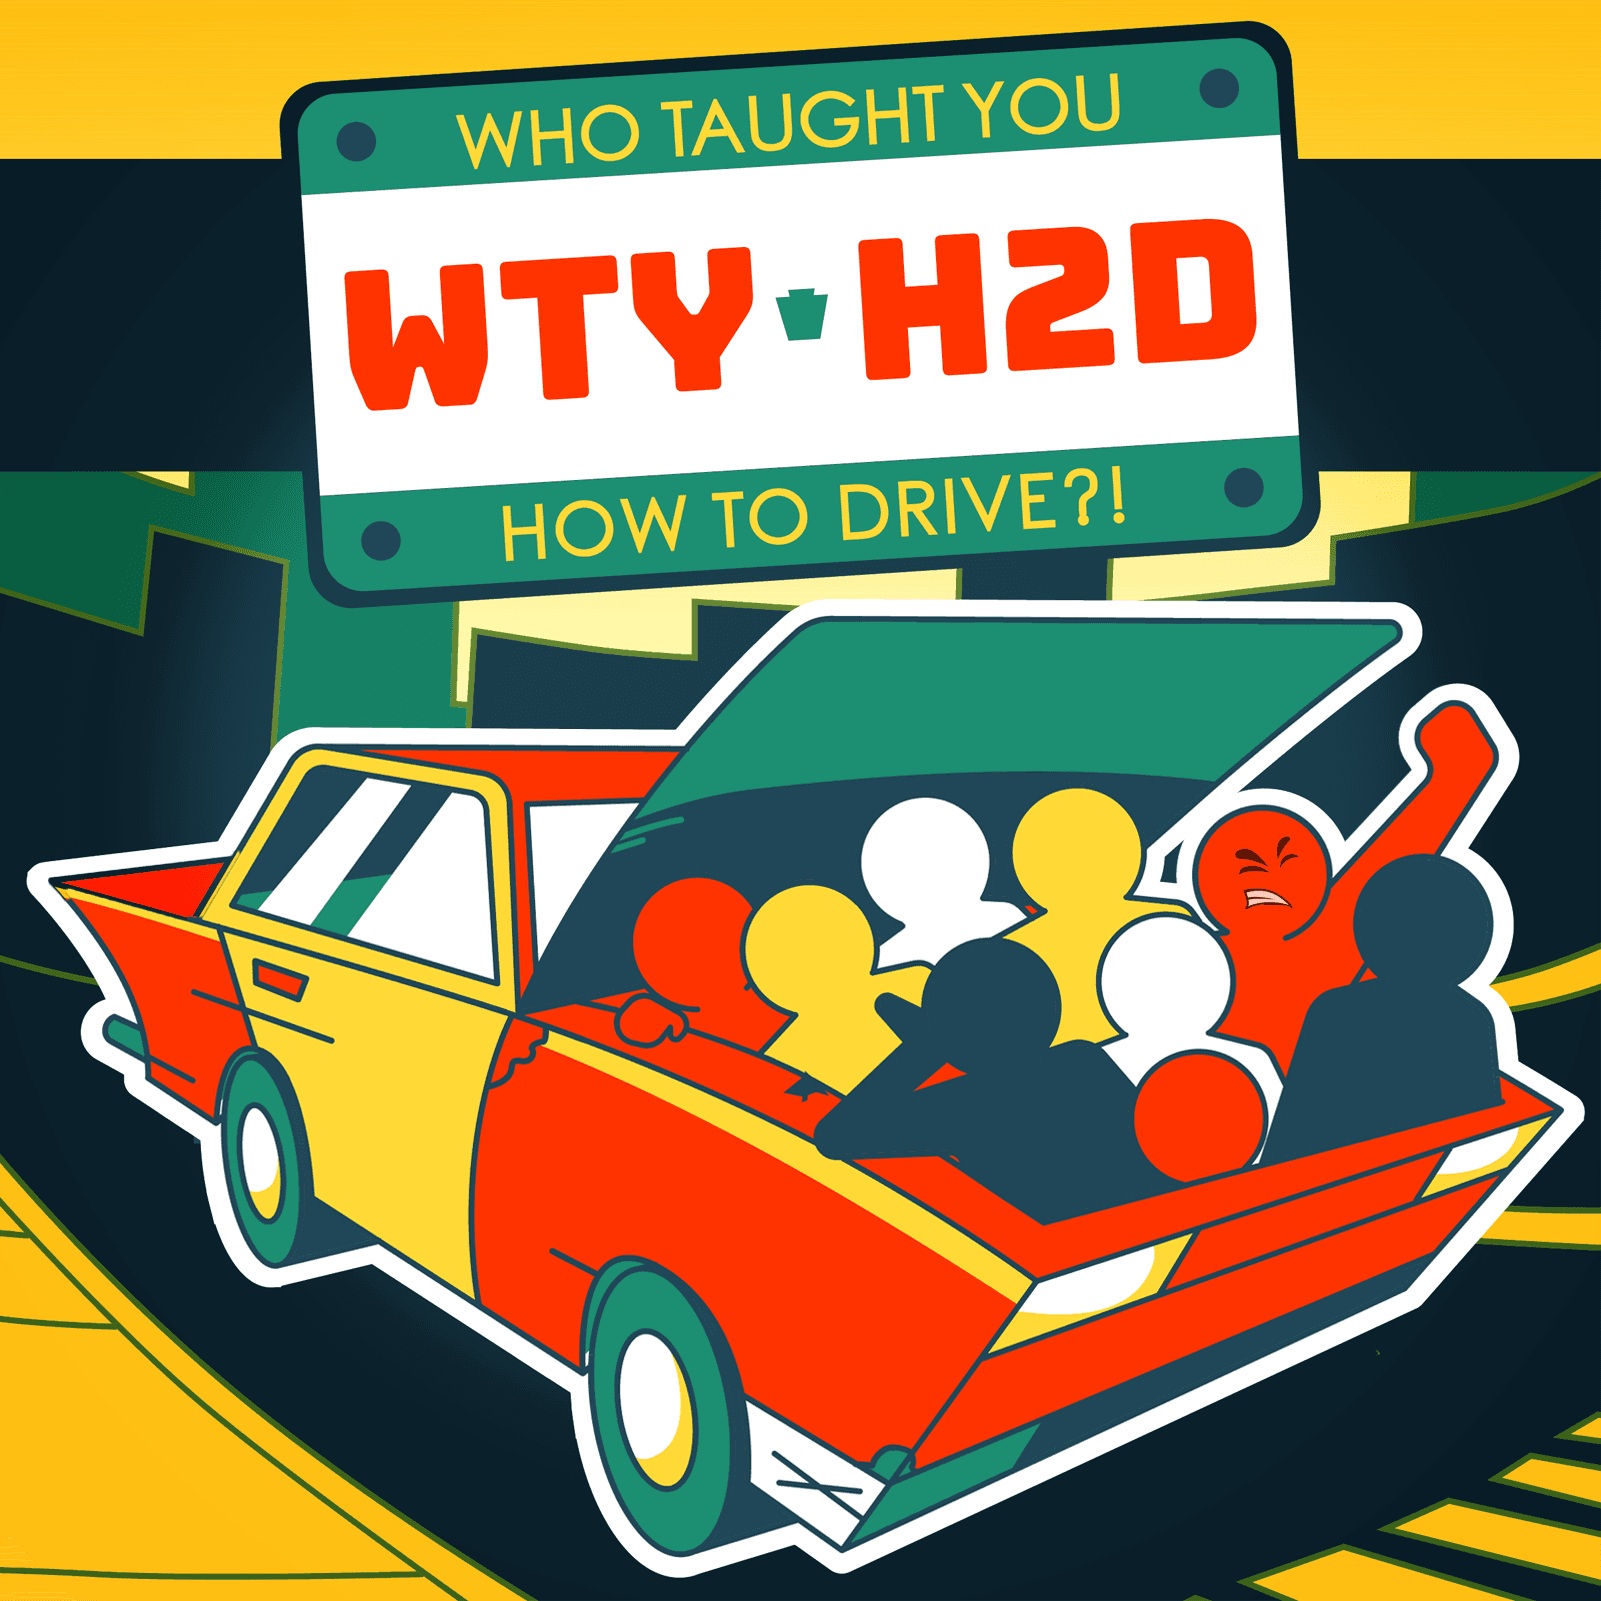 Thumbnail for "WTYH2D?! the LIVE SHOW".